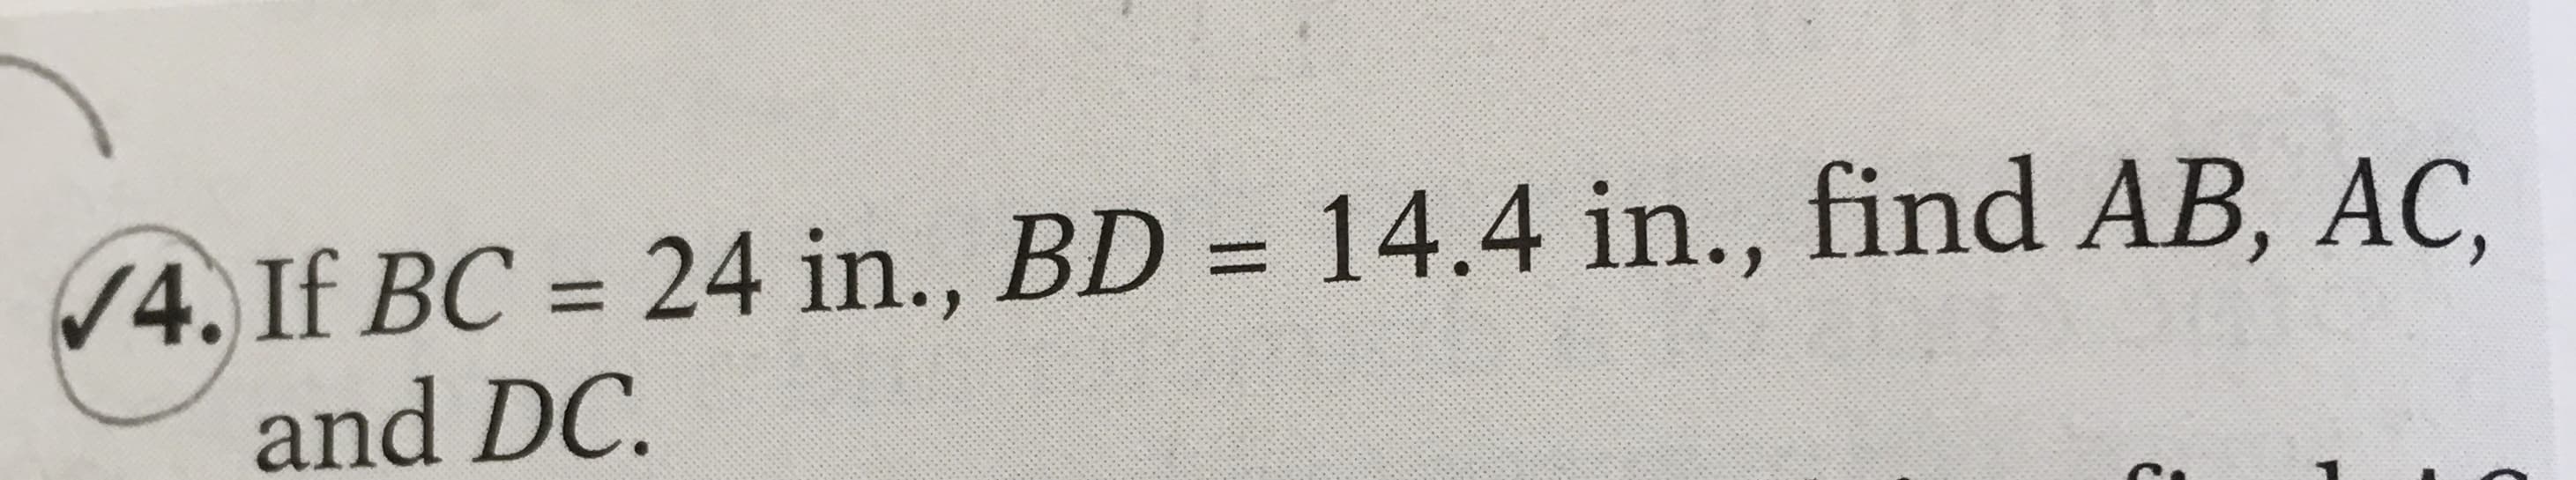 4. If BC = 24 in., BD = 14.4 in., find AB, AC.
and DC.
%3D
%3D
